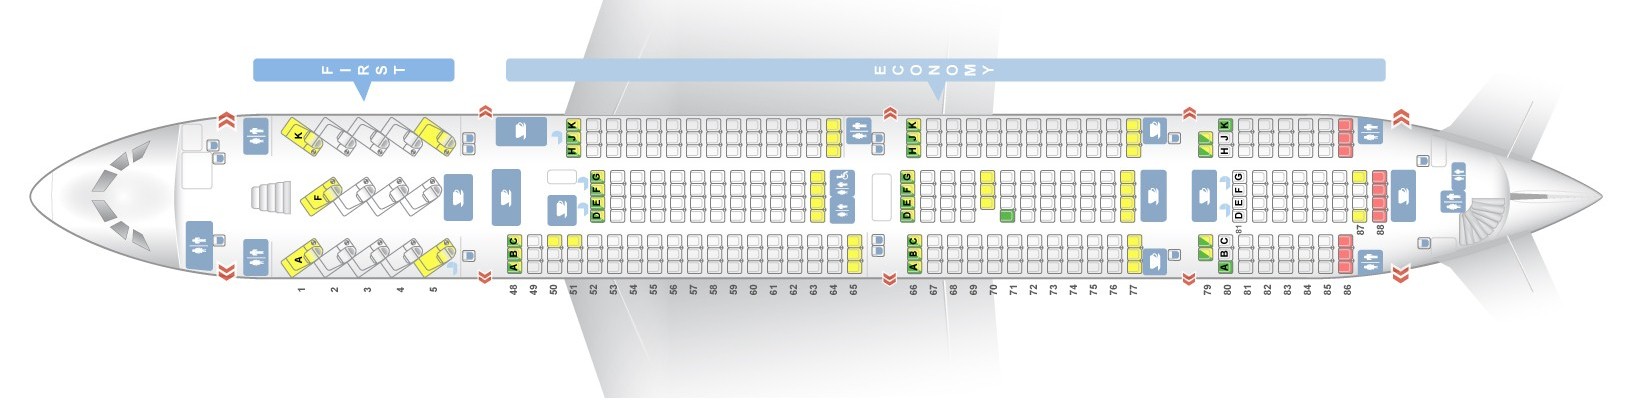 Seat map Airbus A380-800 Qantas Airways. Best seats in the plane